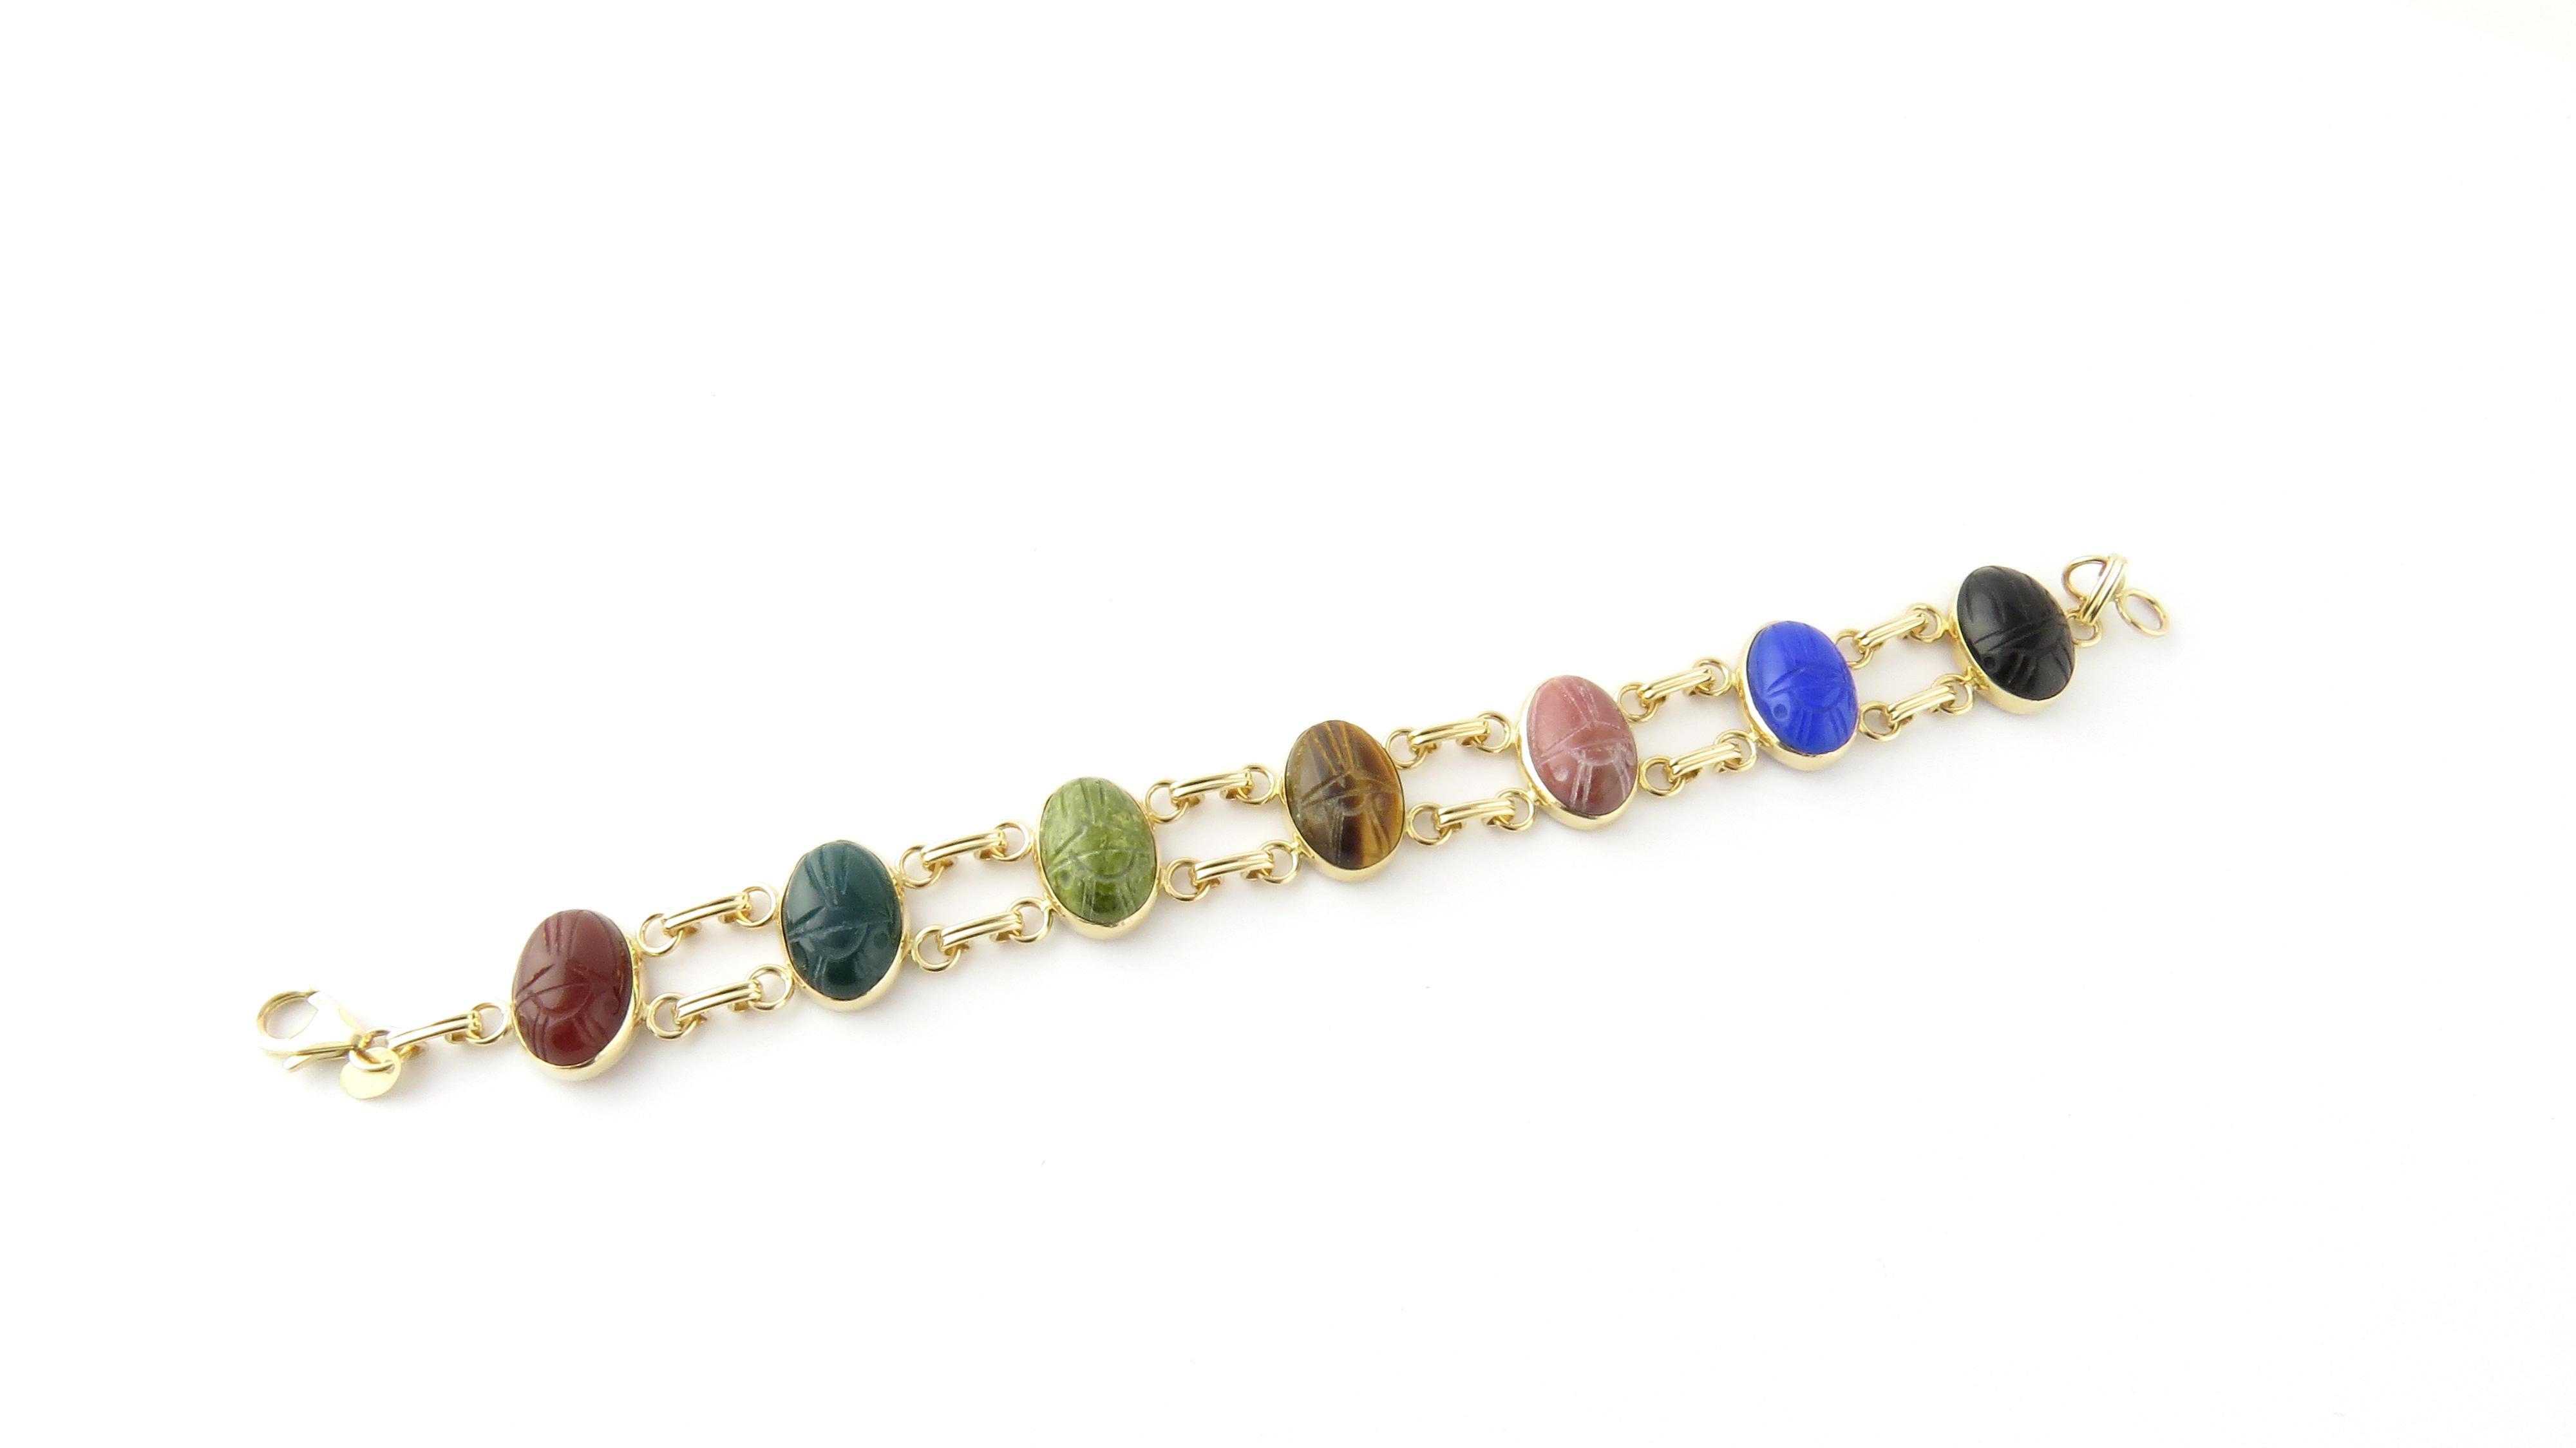 Vintage 14 Karat Yellow Gold Scarab Bracelet

This lovely scarab bracelet features seven oval semi-precious gemstones (14 mm x 11 mm); onyx, carnelian, tiger's eye, dark and light green marble, blue agate and quartz, set in classic 14K yellow